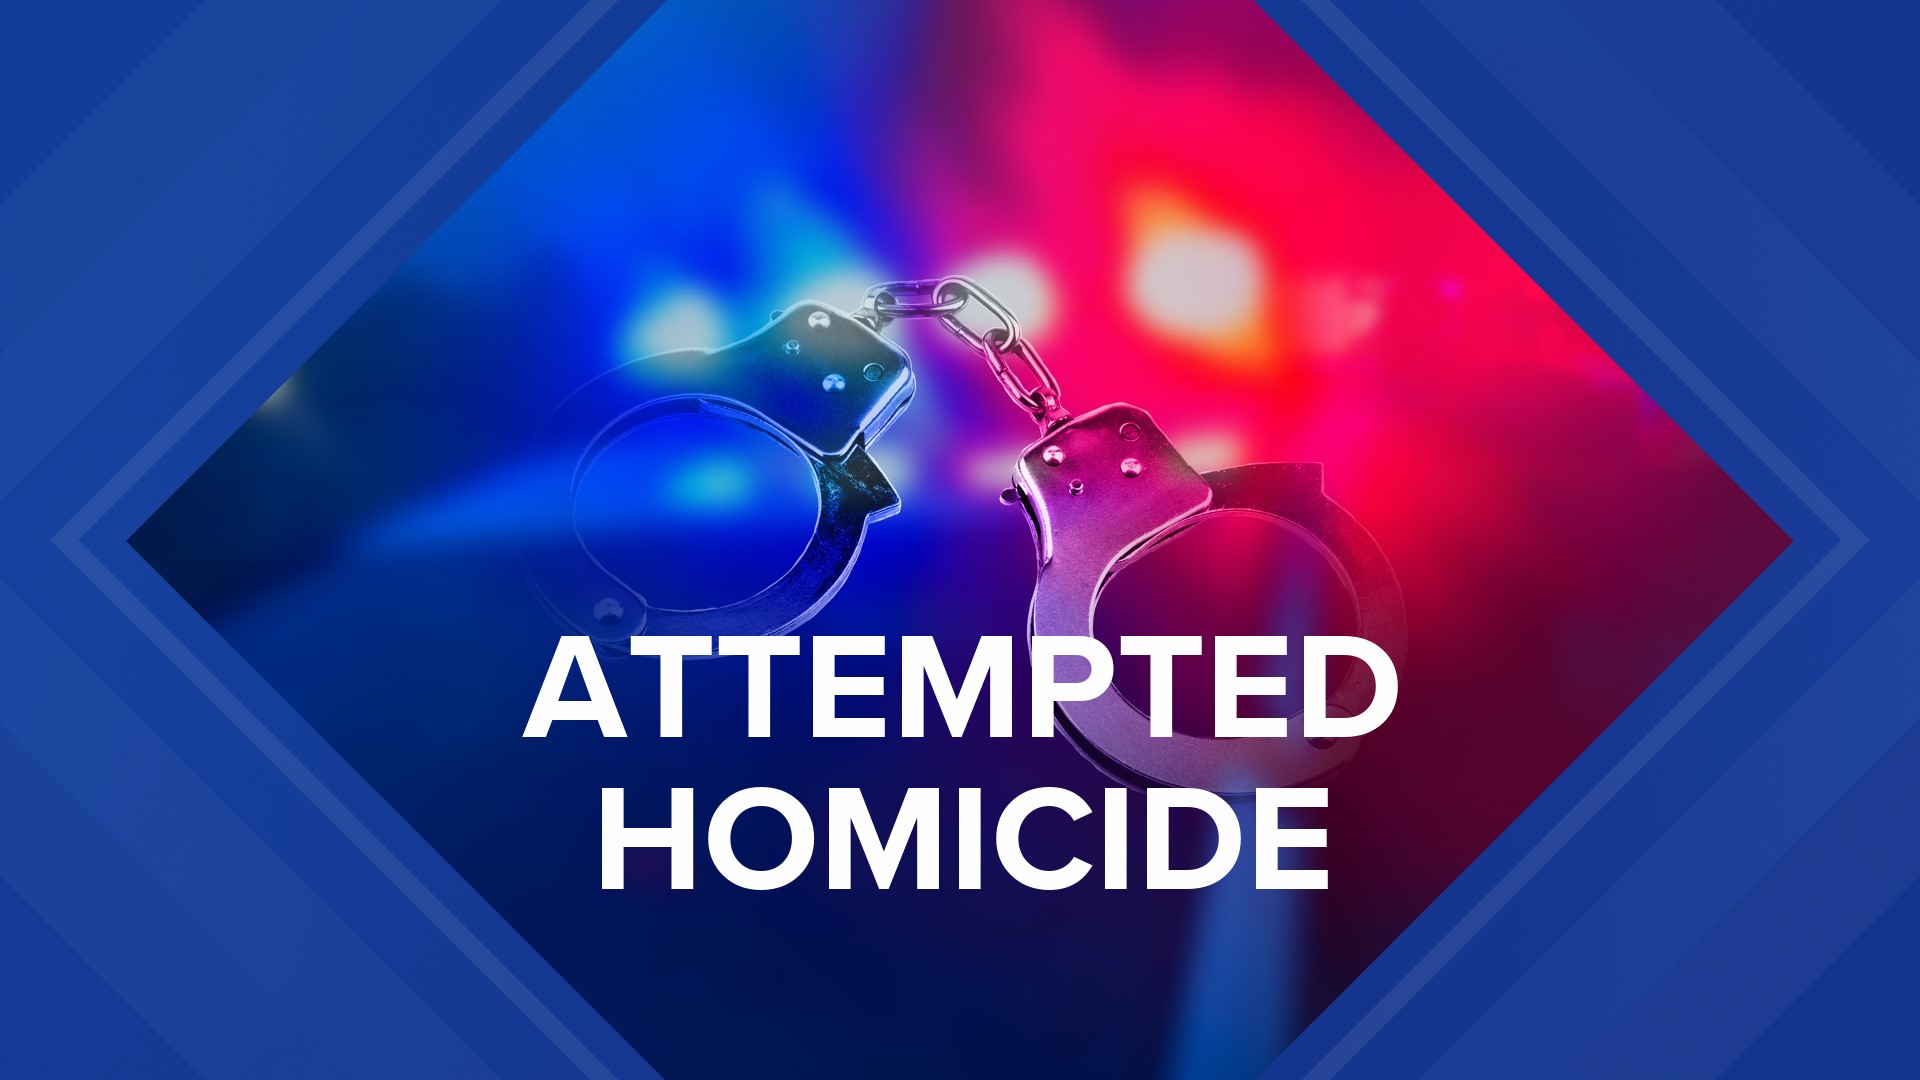 The man faces attempted homicide charges after the incident in the Poconos.